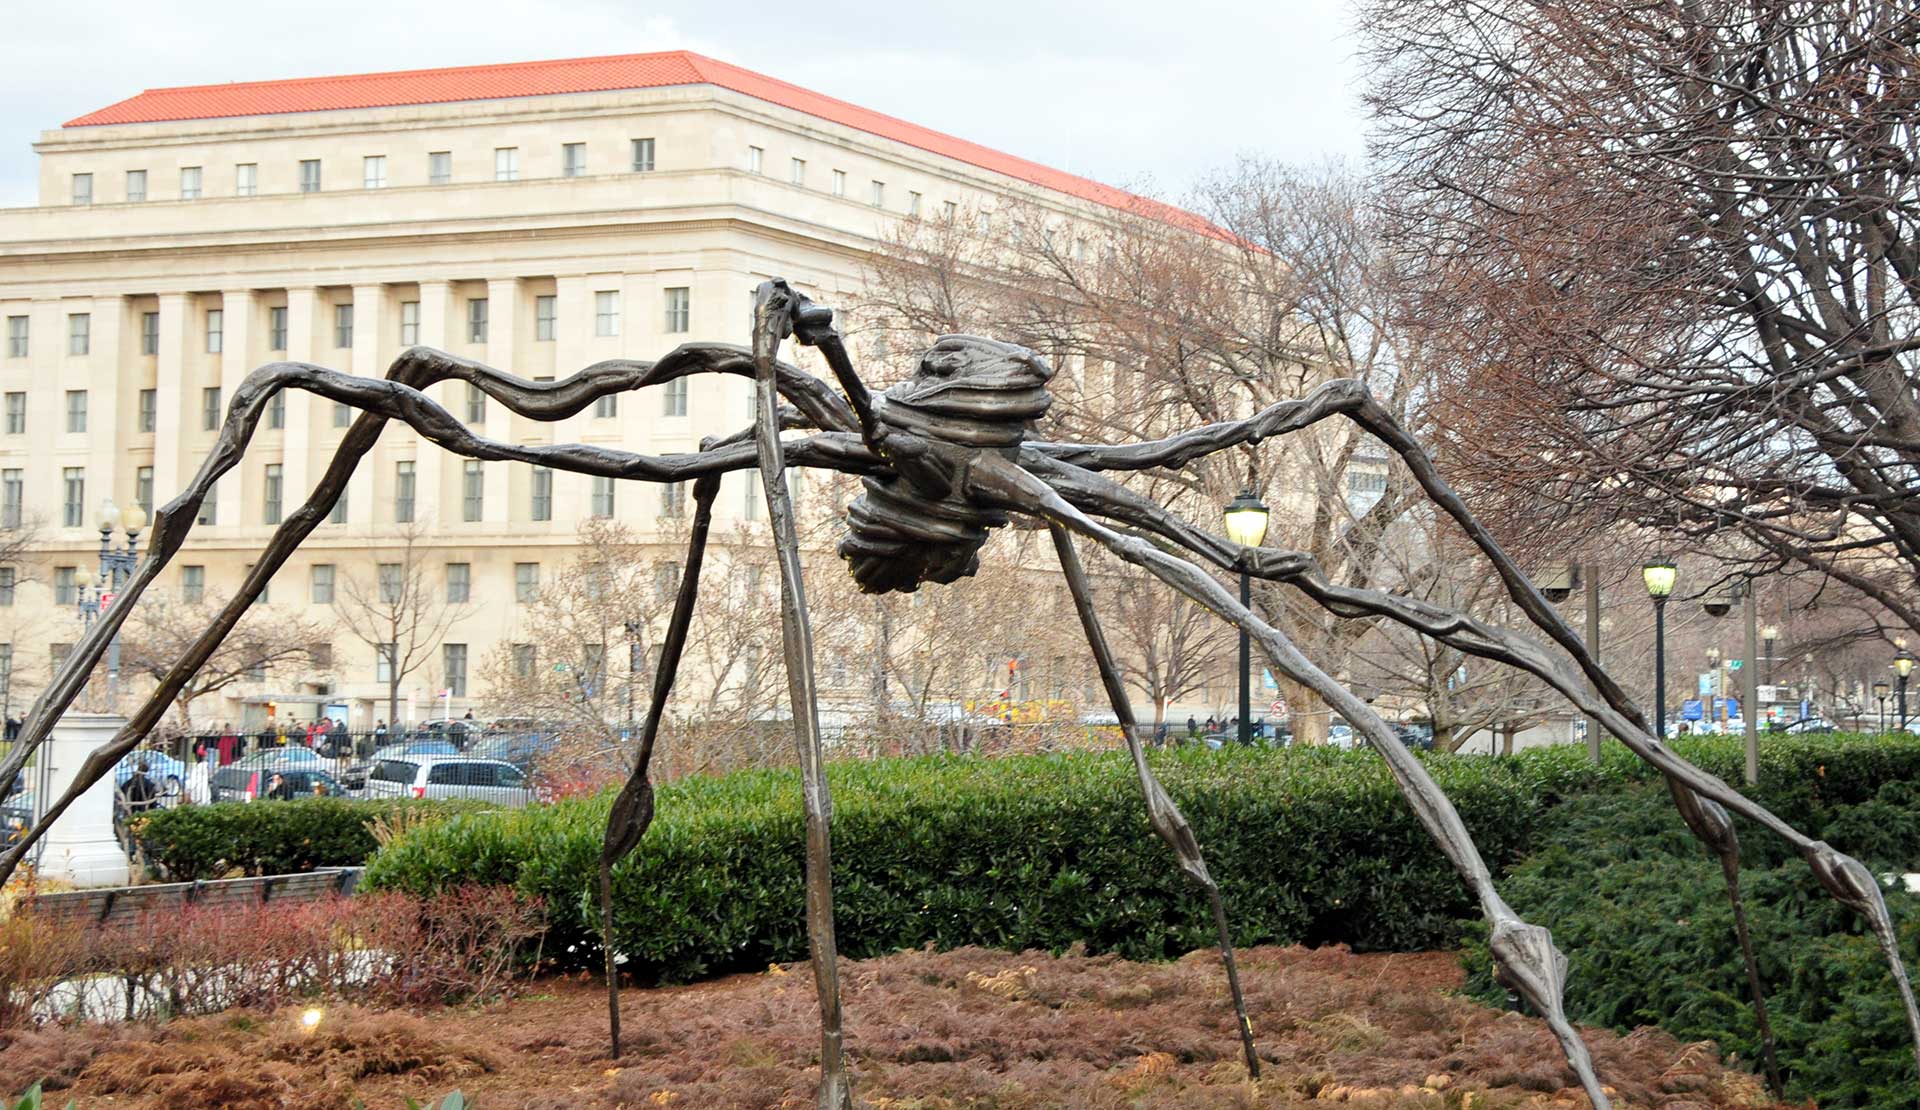 Spider, by Louise Bourgeois